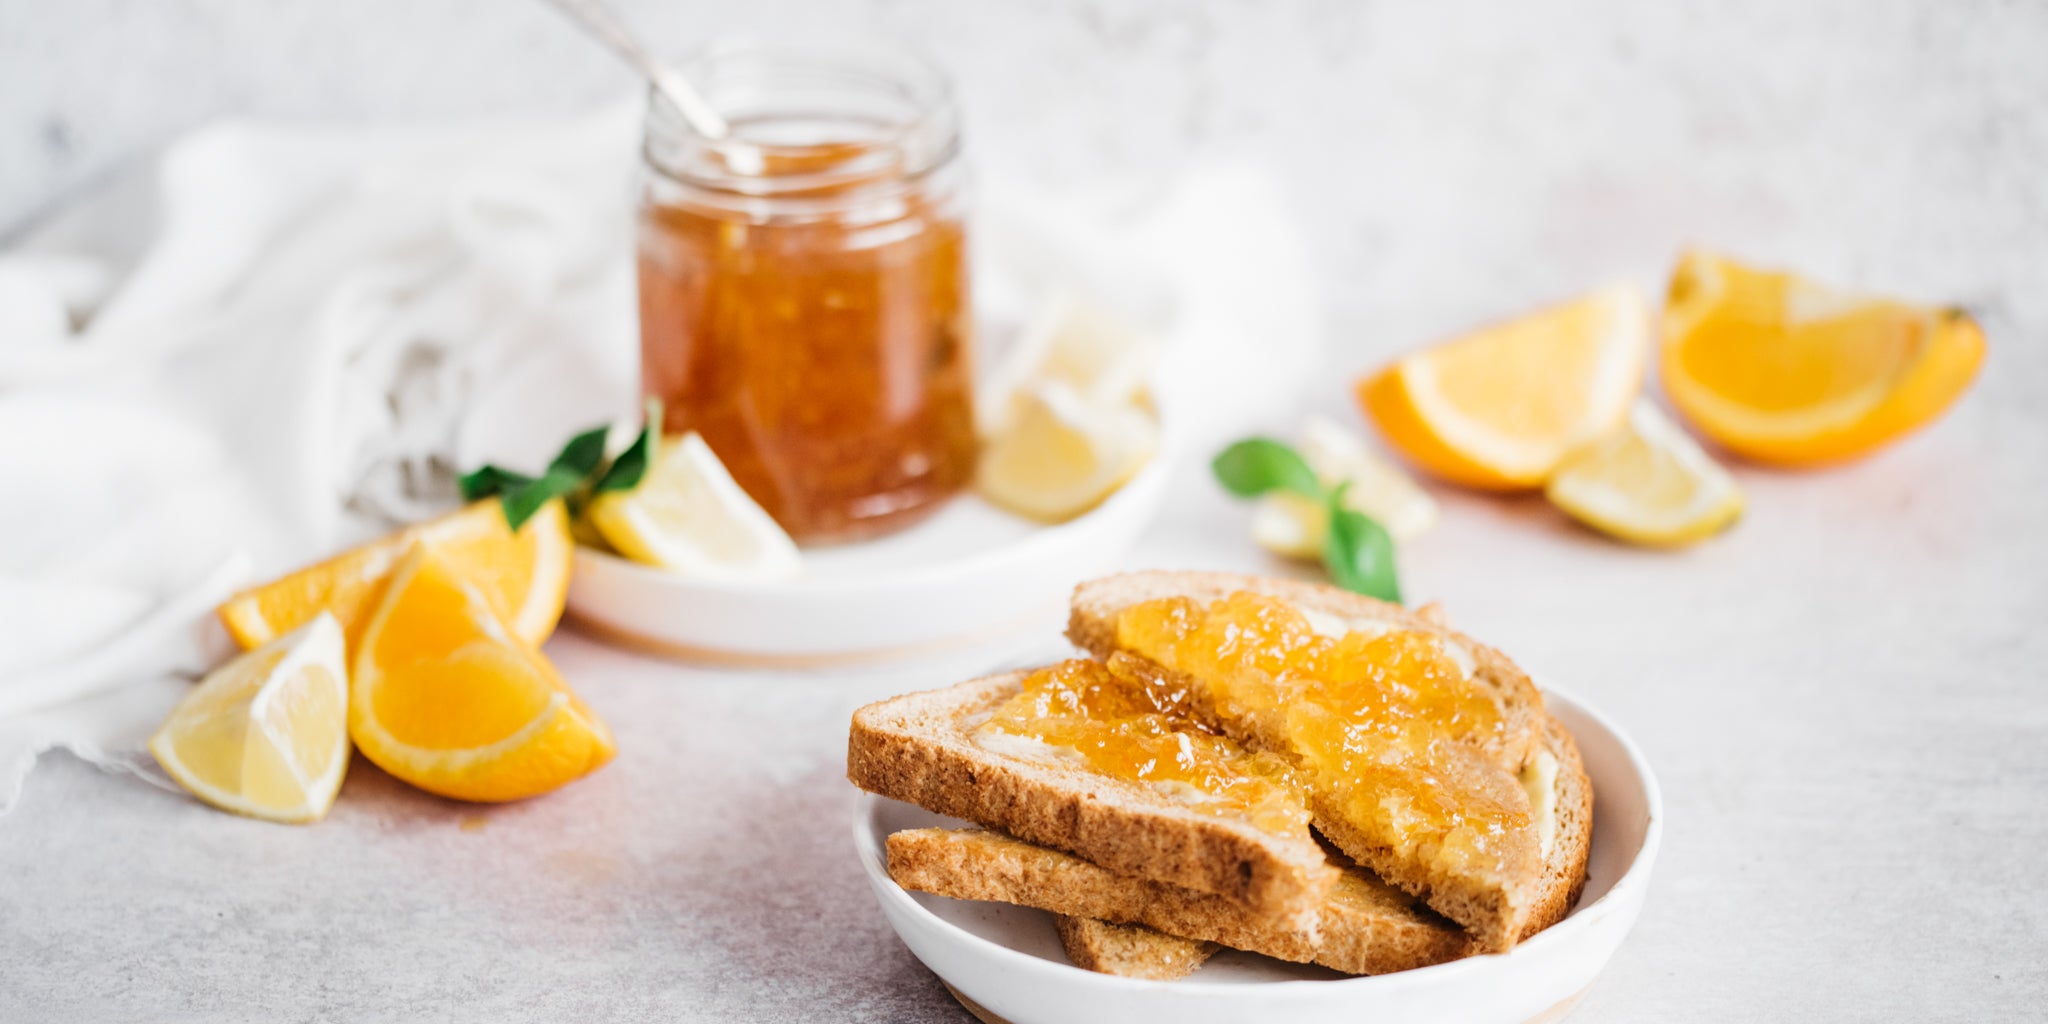 Toast on a white plate spread with marmalade and an open jar of marmalade in background with orange slices